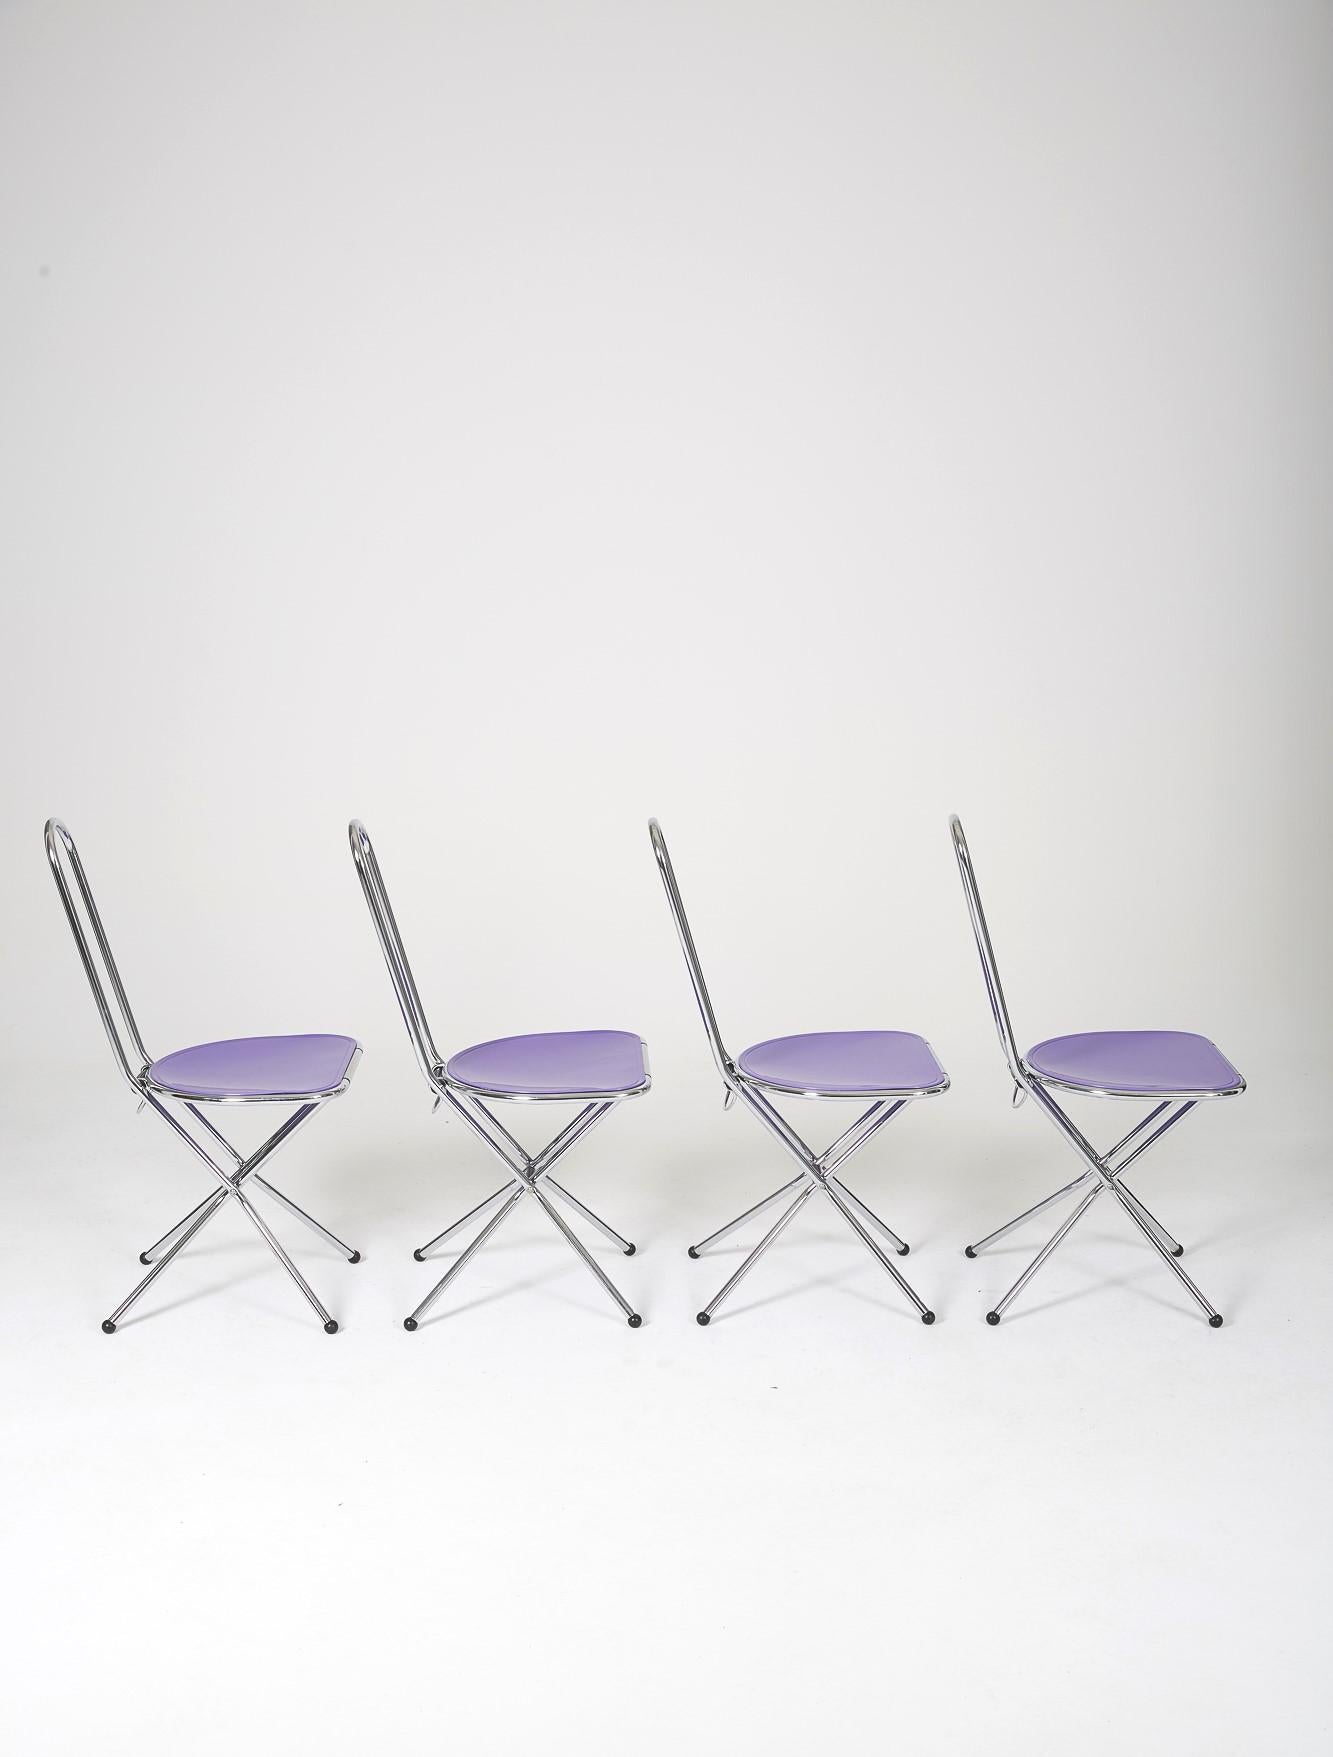 4 ISAK folding chairs by Niels Gammelgaard for Ikea, 1980s. Made in Italy, Swedish design. Chromed metal structure and purple plexiglass seat. Very good original condition with some superficial scratches on the seat and traces of use on the base.